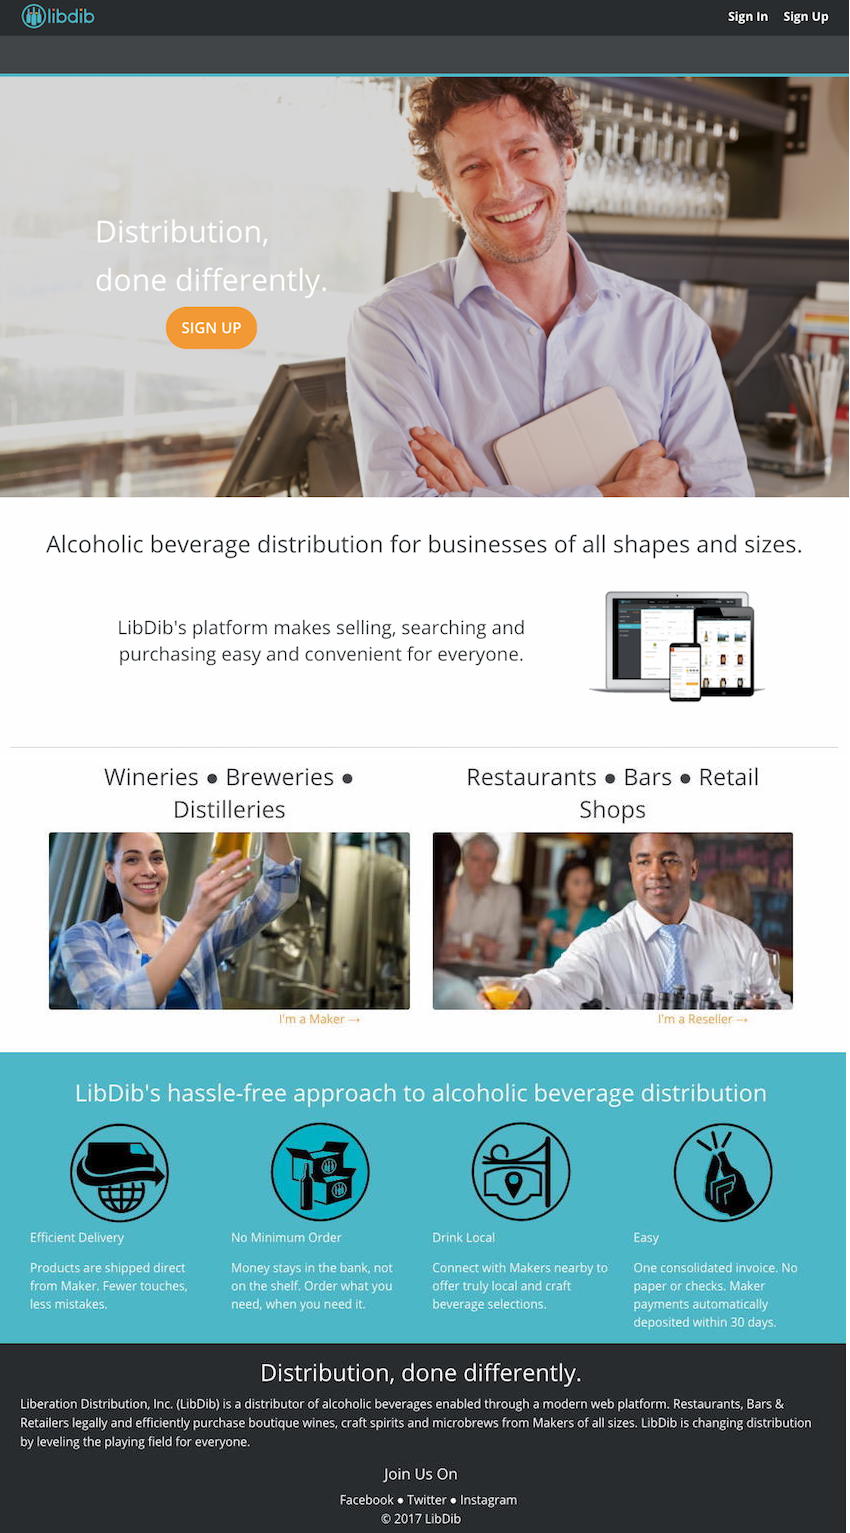 Liberation Distribution, Inc. (LibDib) is a distributor of alcoholic beverages enabled through a proprietary desktop and mobile friendly web platform.